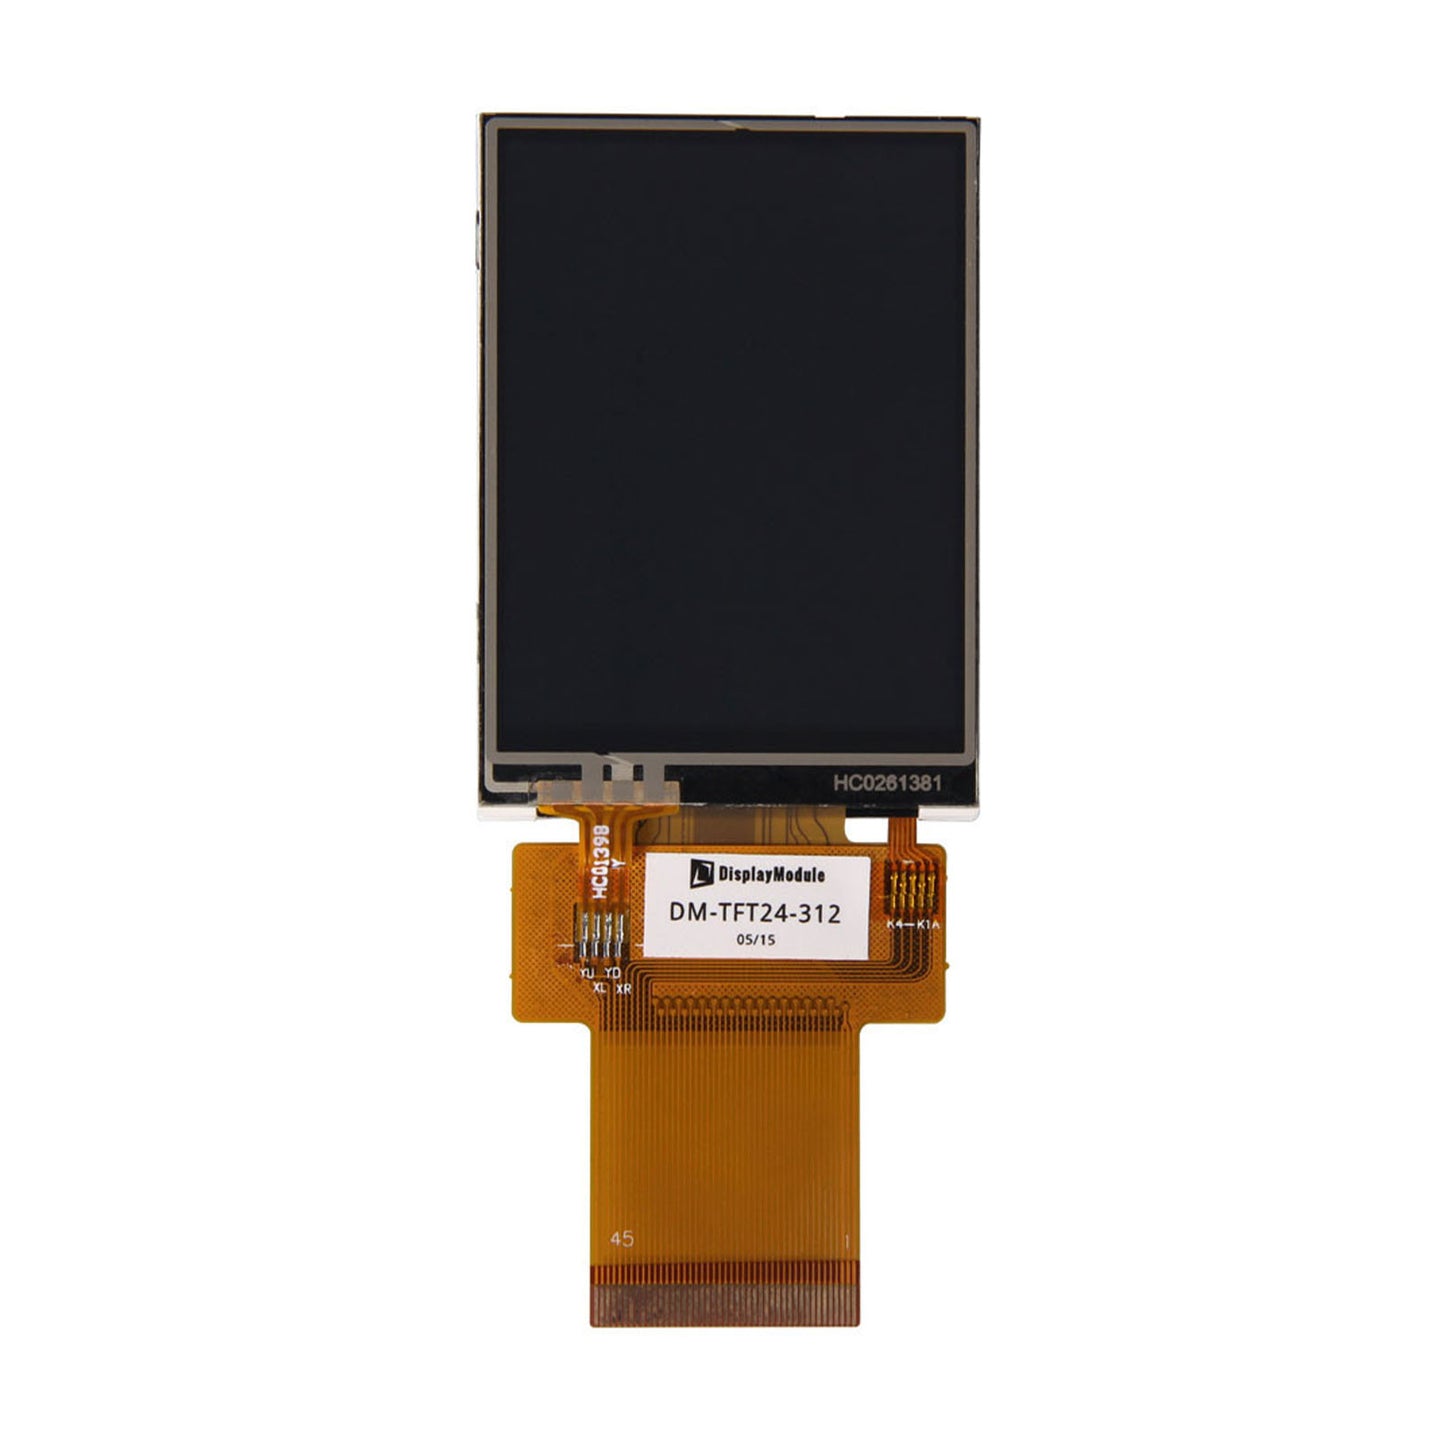 DisplayModule 2.4" 240x320 TFT LCD Display Panel With Resistive Touch - SPI, MCU, RGB